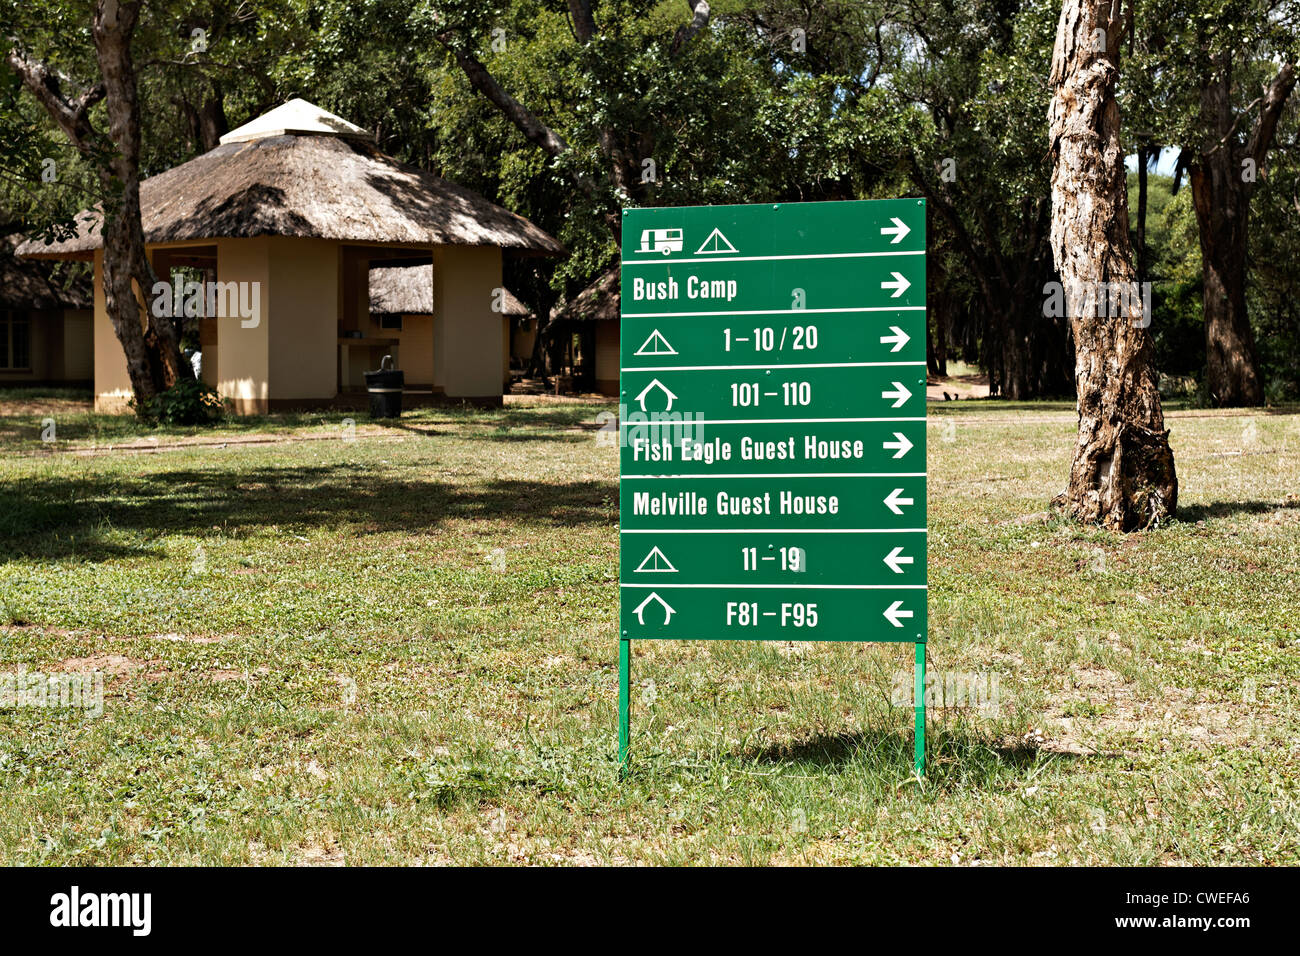 No day visitors allowed sign in the Letaba Camp, Kruger National Park, South Africa Stock Photo